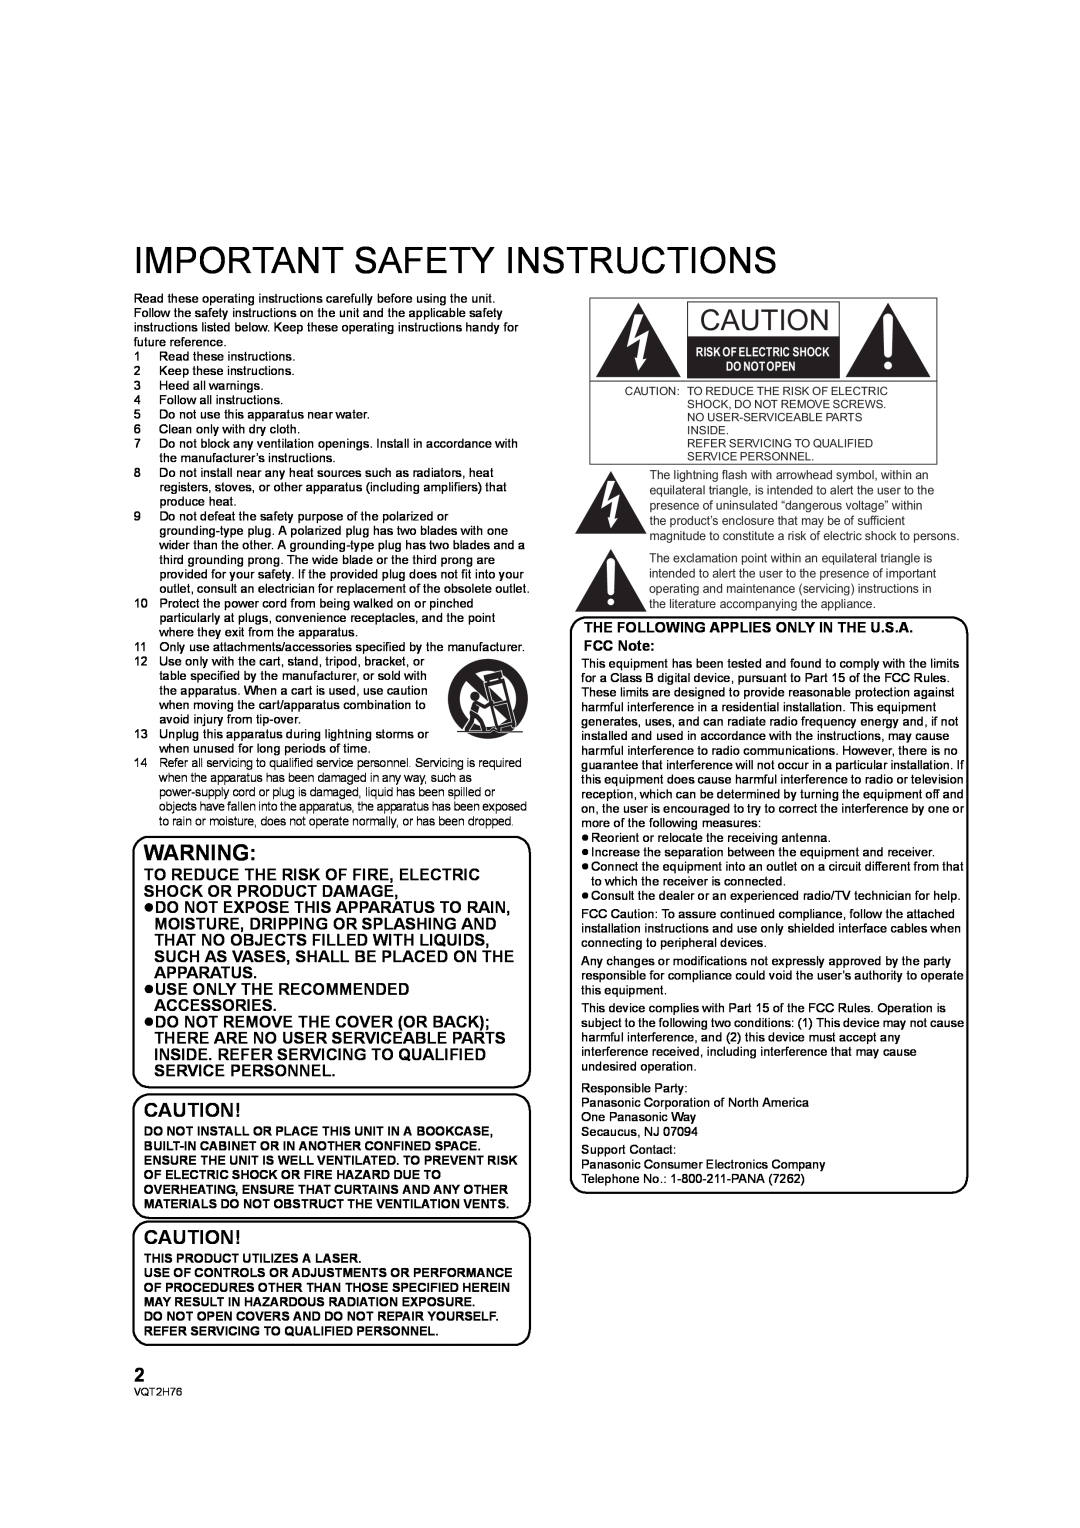 Panasonic DMP-BD85 Important Safety Instructions, To Reduce The Risk Of Fire, Electric Shock Or Product Damage 